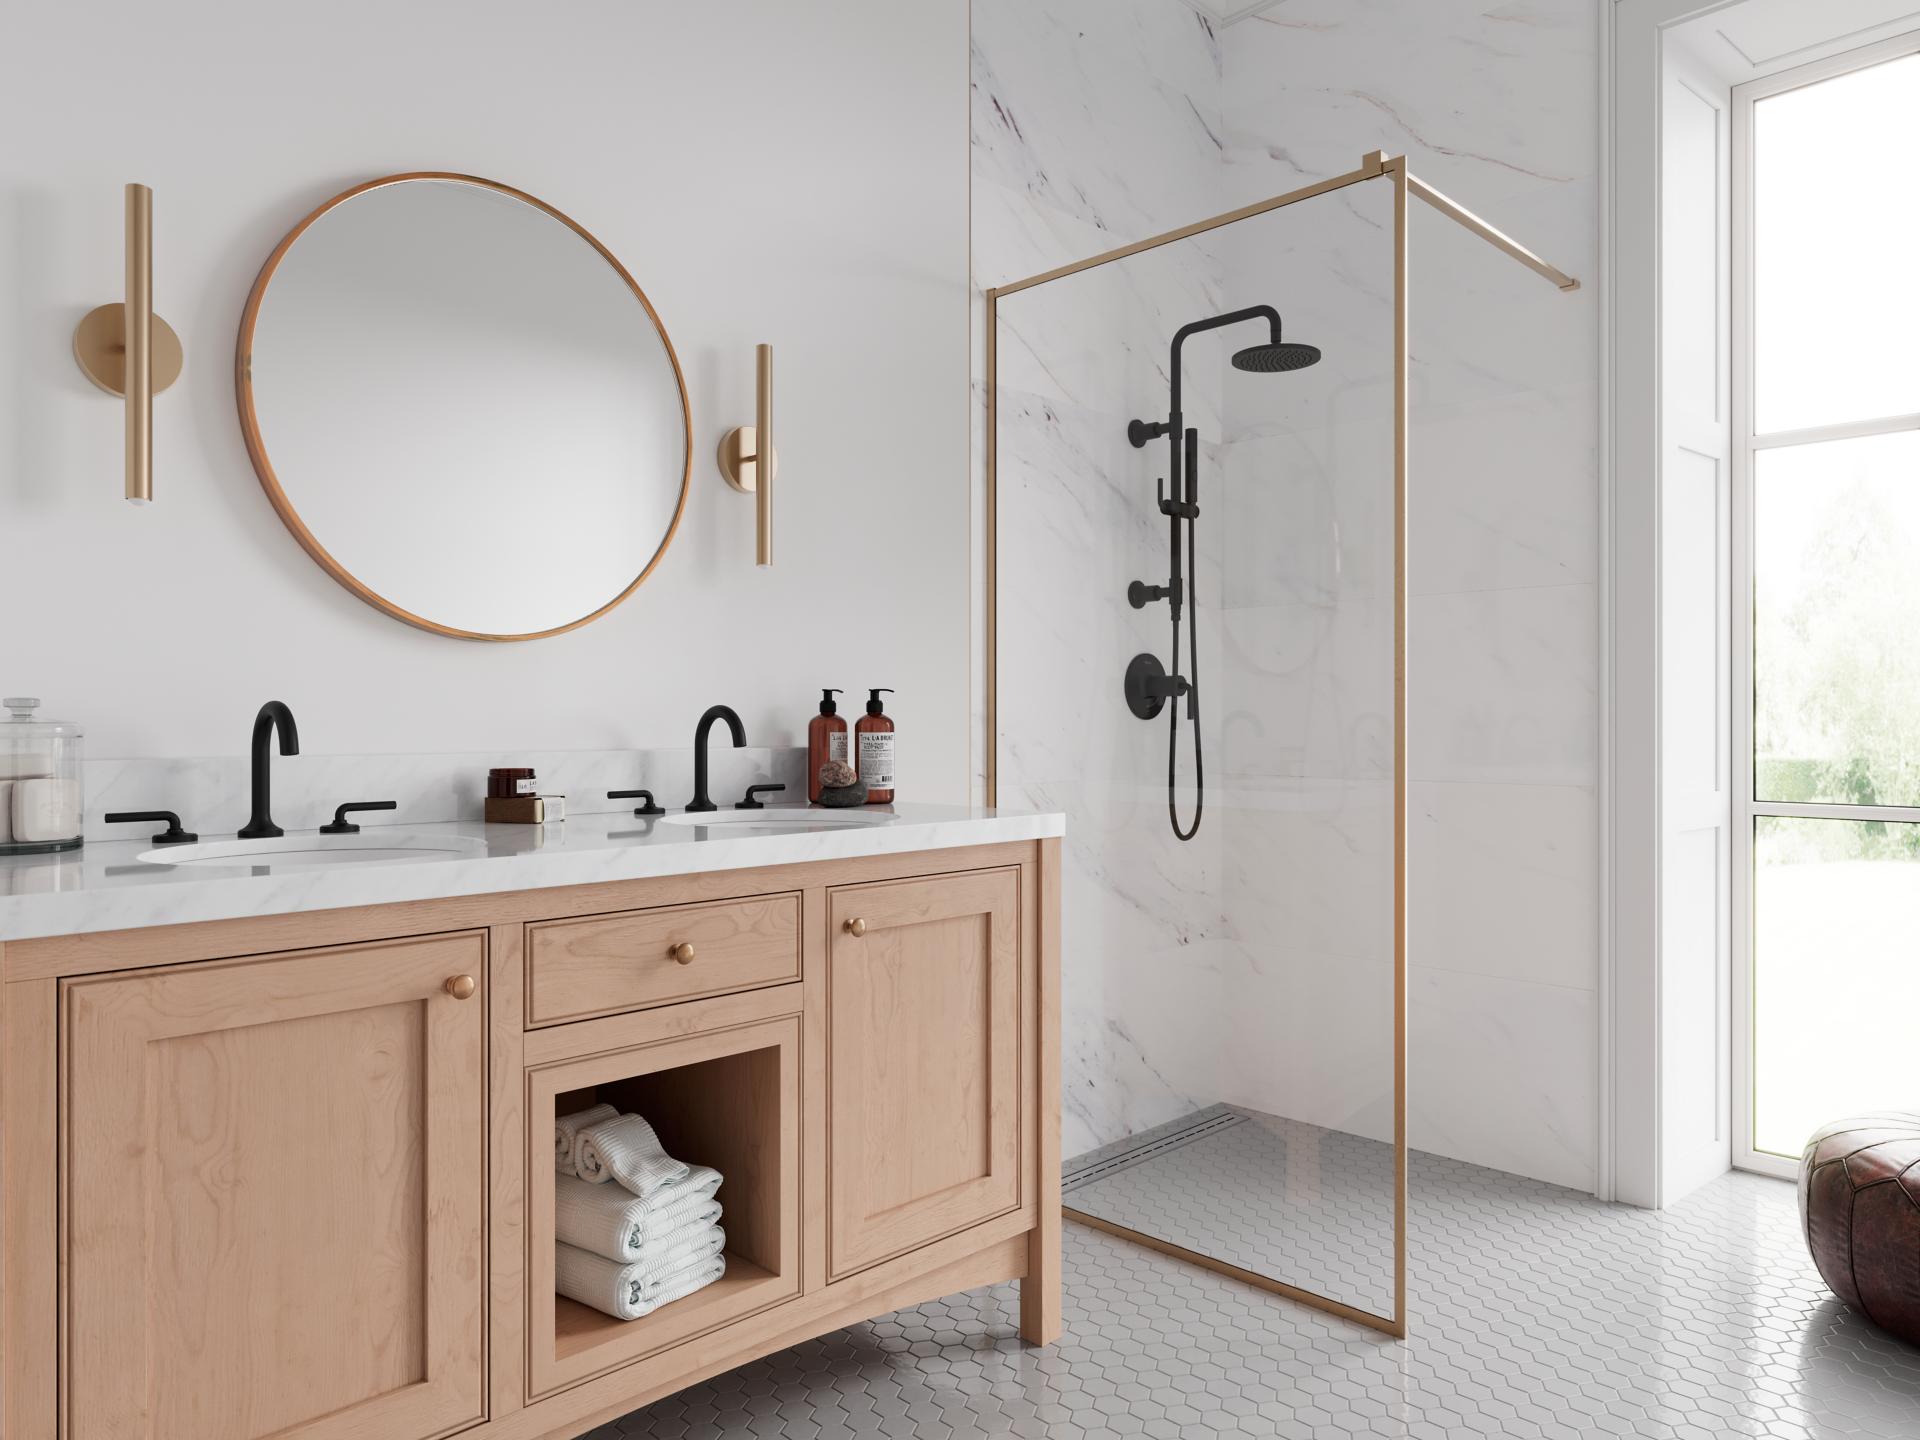 Plumber: Matching bathroom accessories can enhance your decorating skills